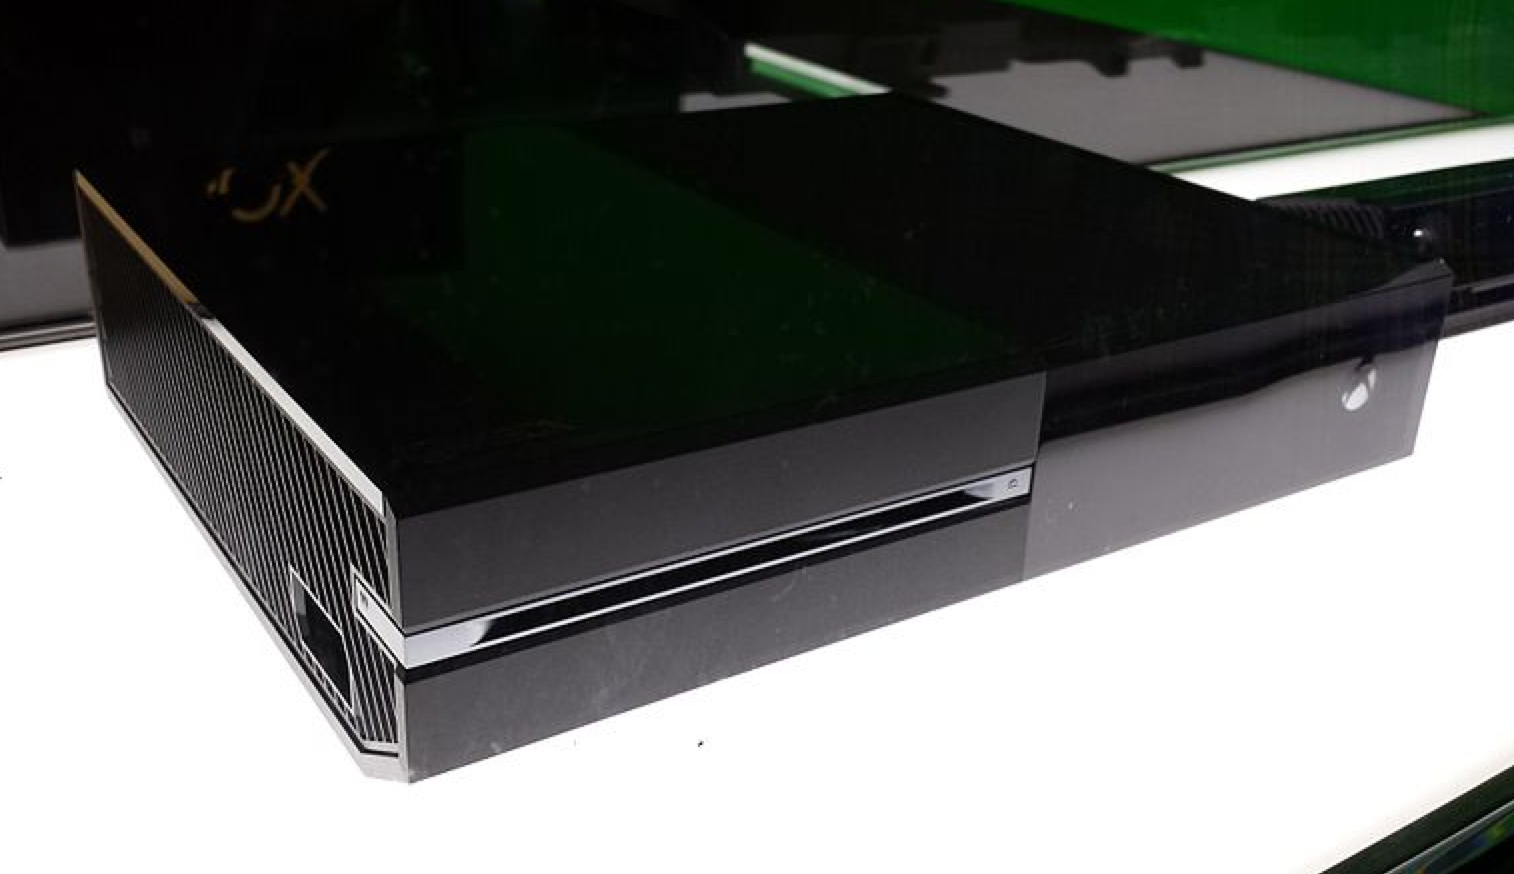 New Xbox Missing from Brazil Stores: Daily